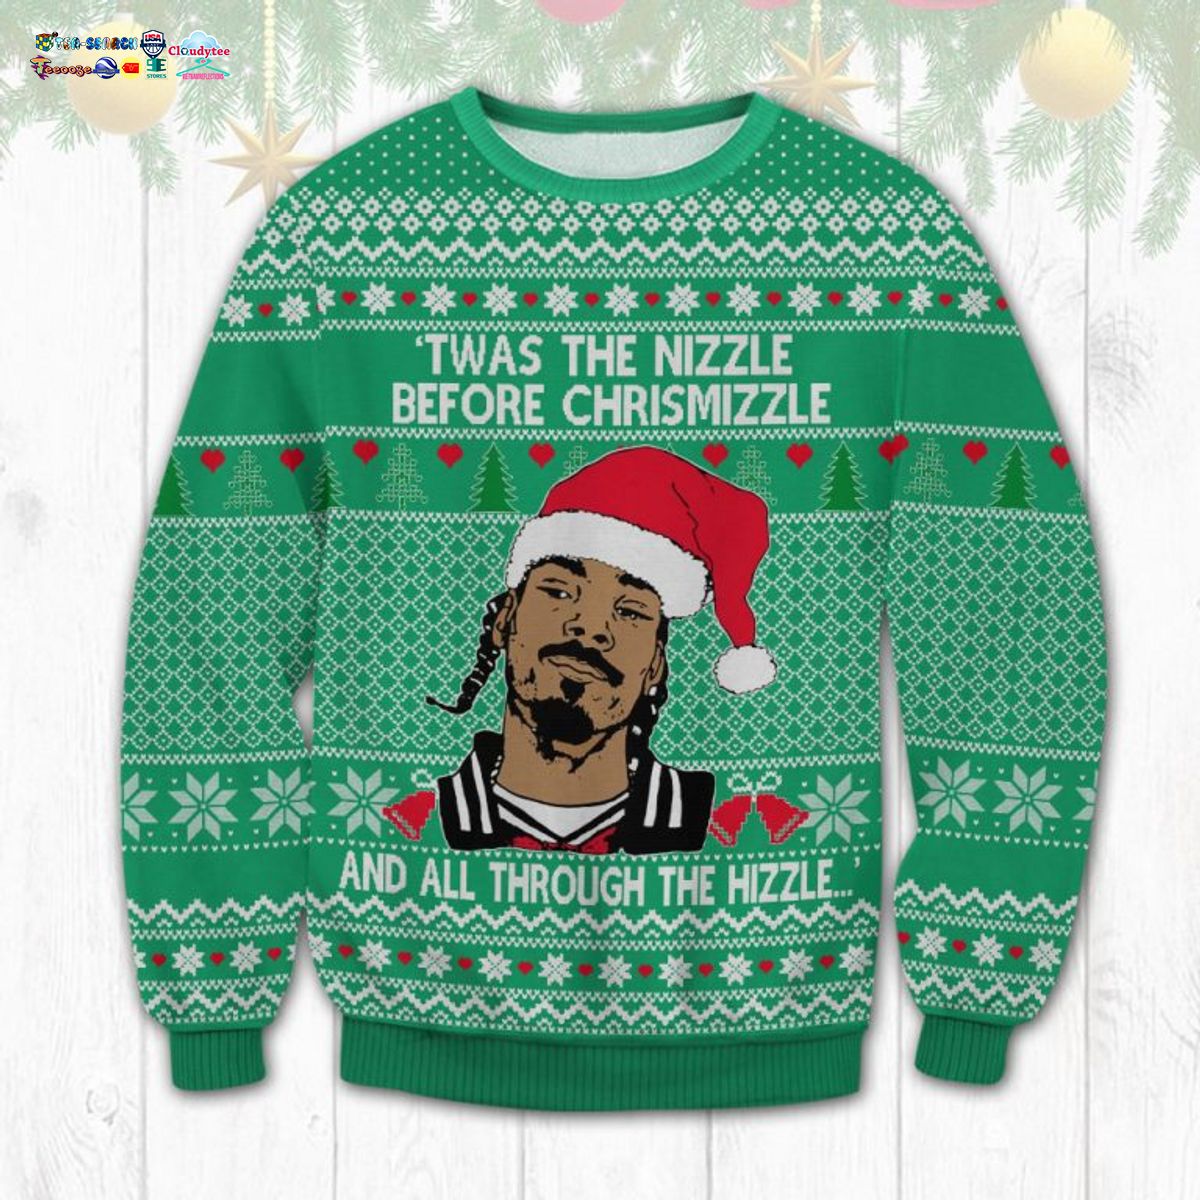 Snoop Dogg Twas The Nizzle Before Christmizzle Ugly Christmas Sweater